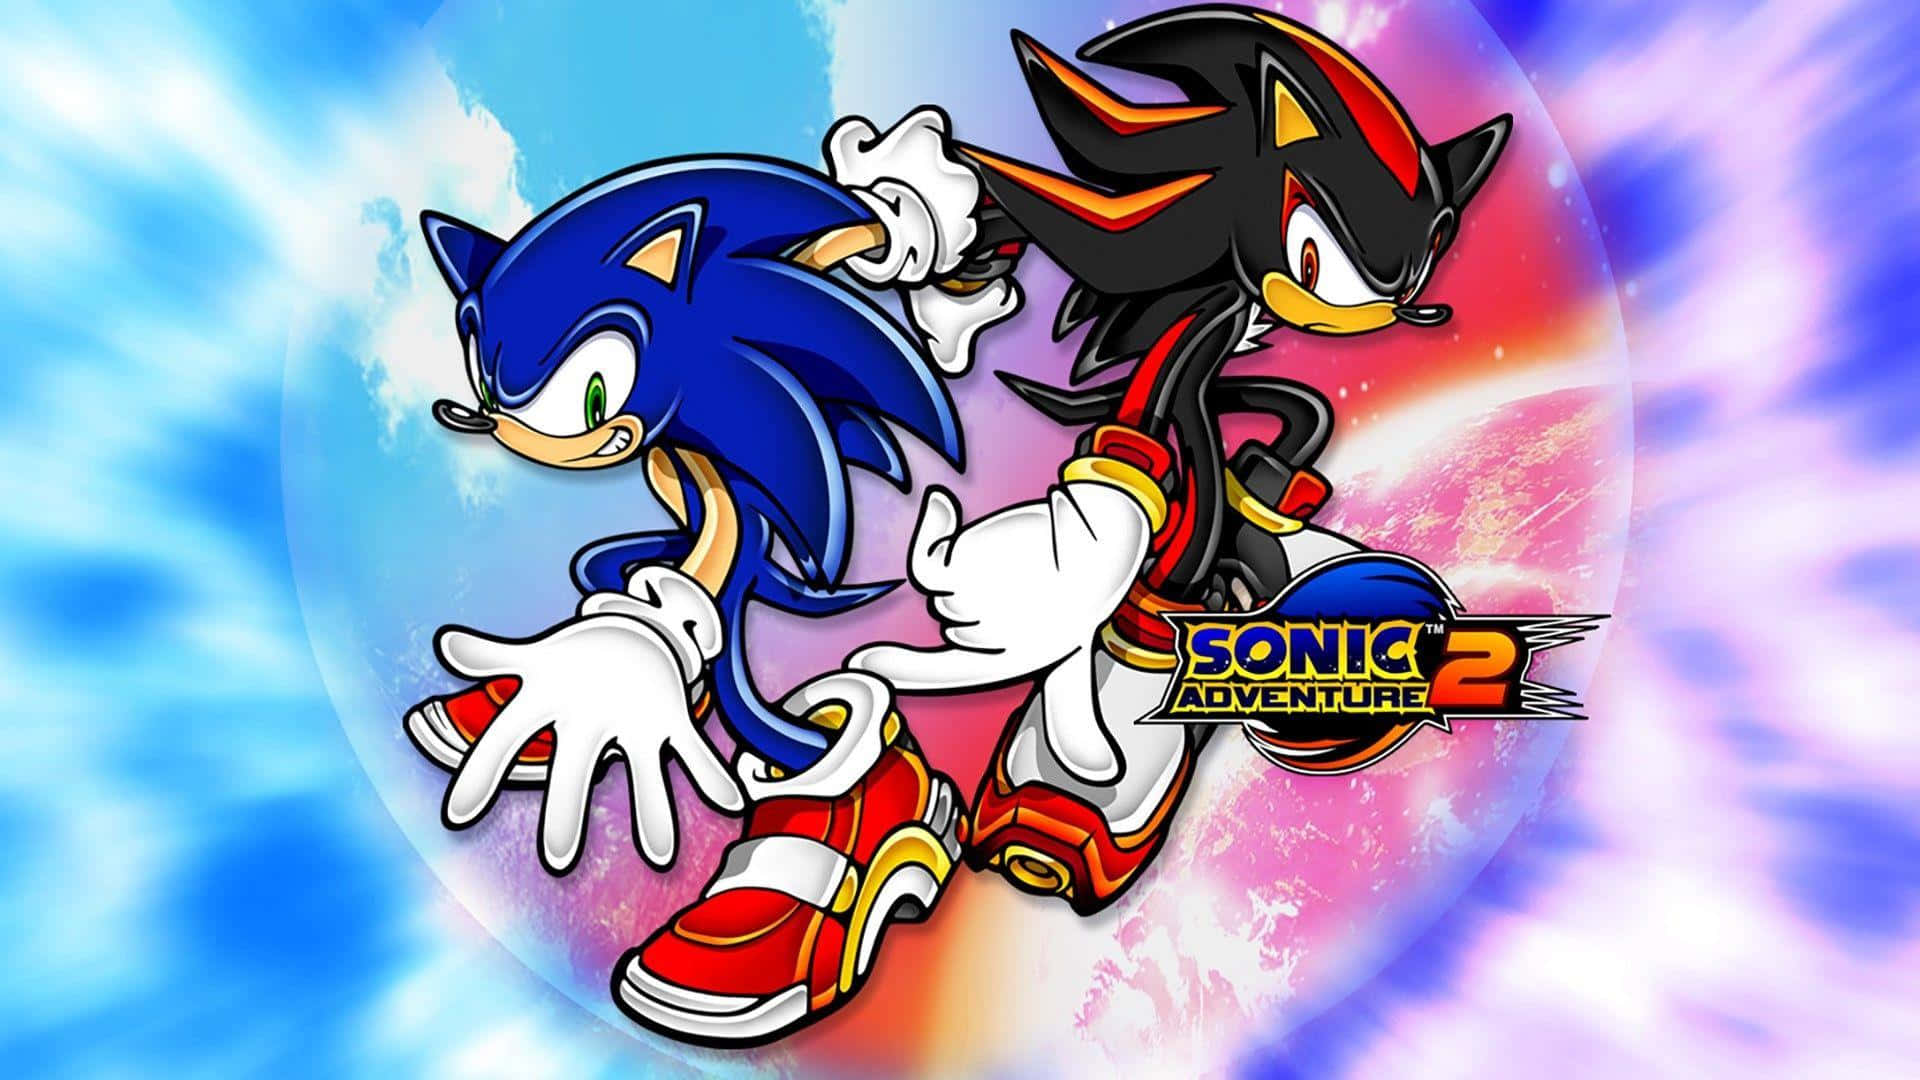 Sonic Adventure HD - Sonic and Tails Racing Across a Cityscape Wallpaper